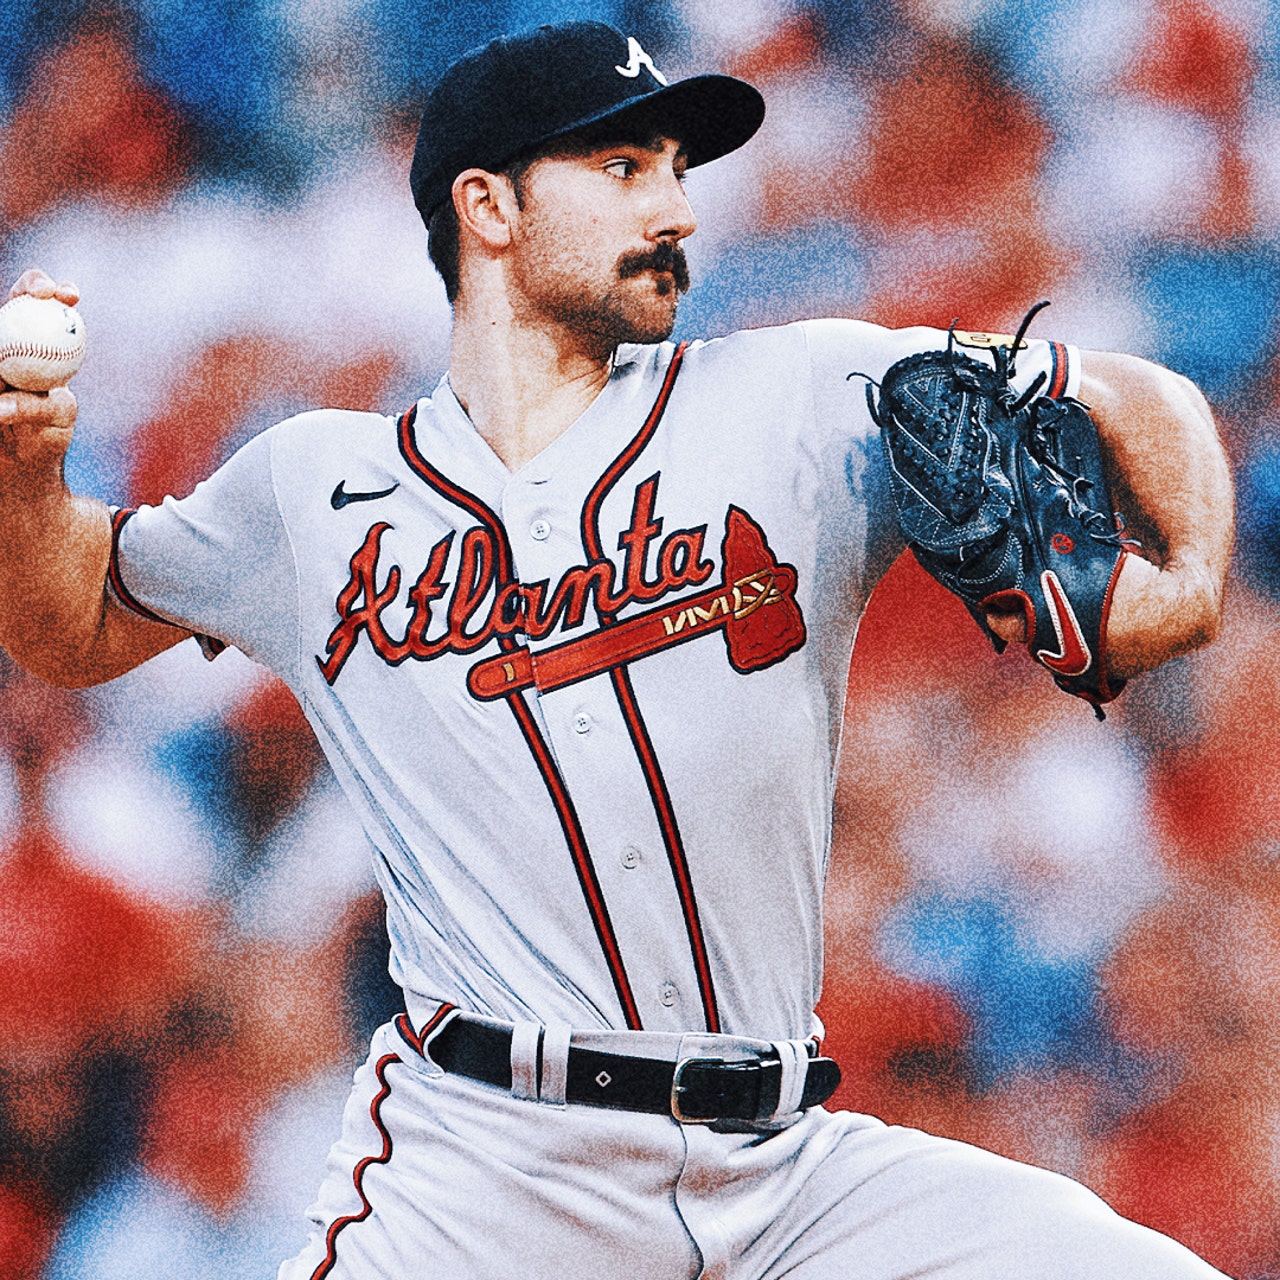 Atlanta Braves clinch 6th straight NL East title, beat Phillies 4-1